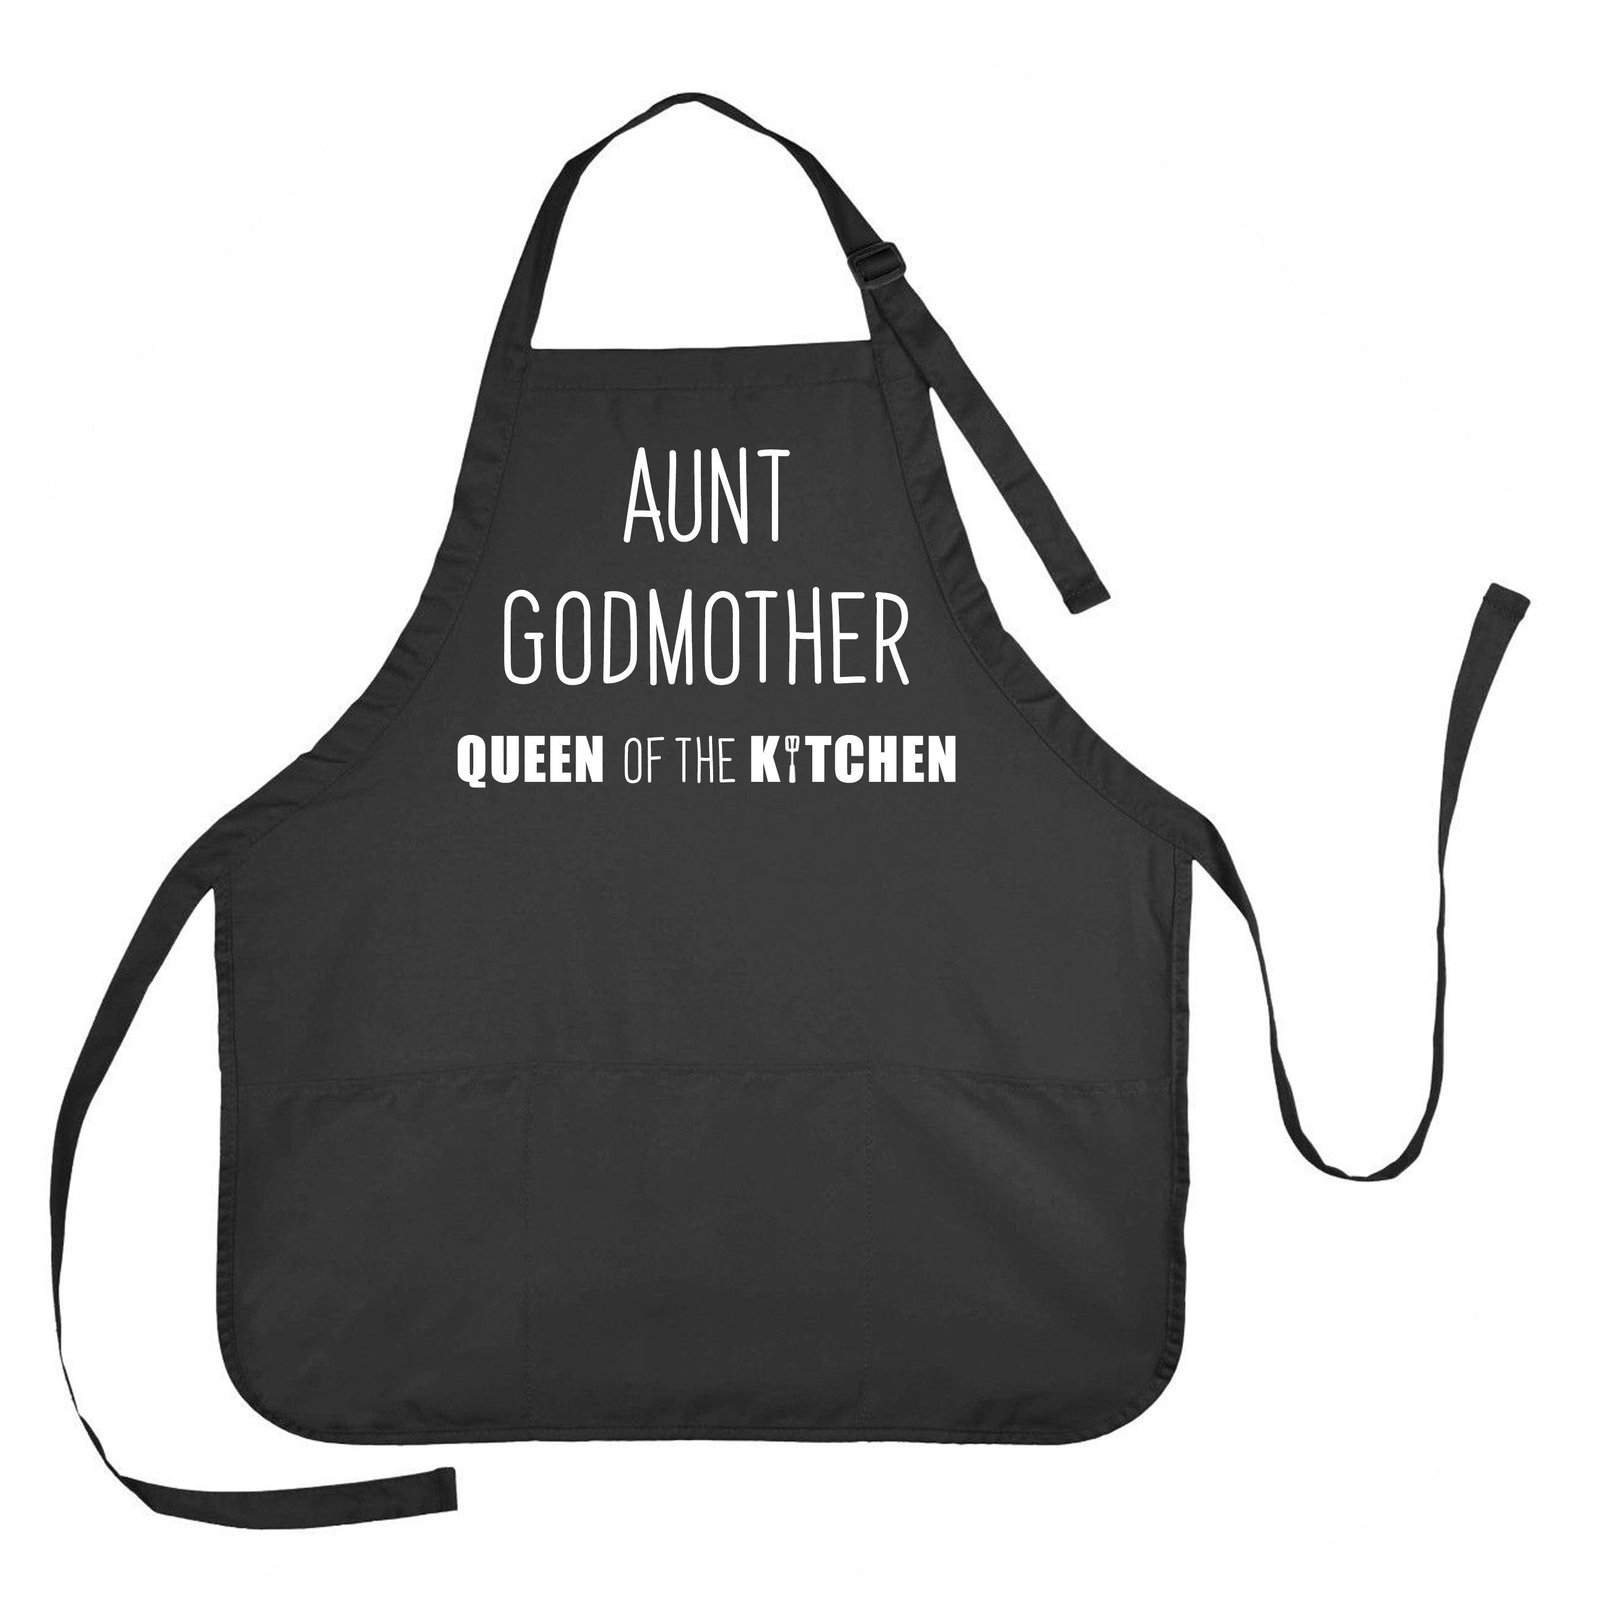 Primary image for Aunt, GodMother, Queen of the Kitchen Apron, Apron for Godmother, Godmother Gift